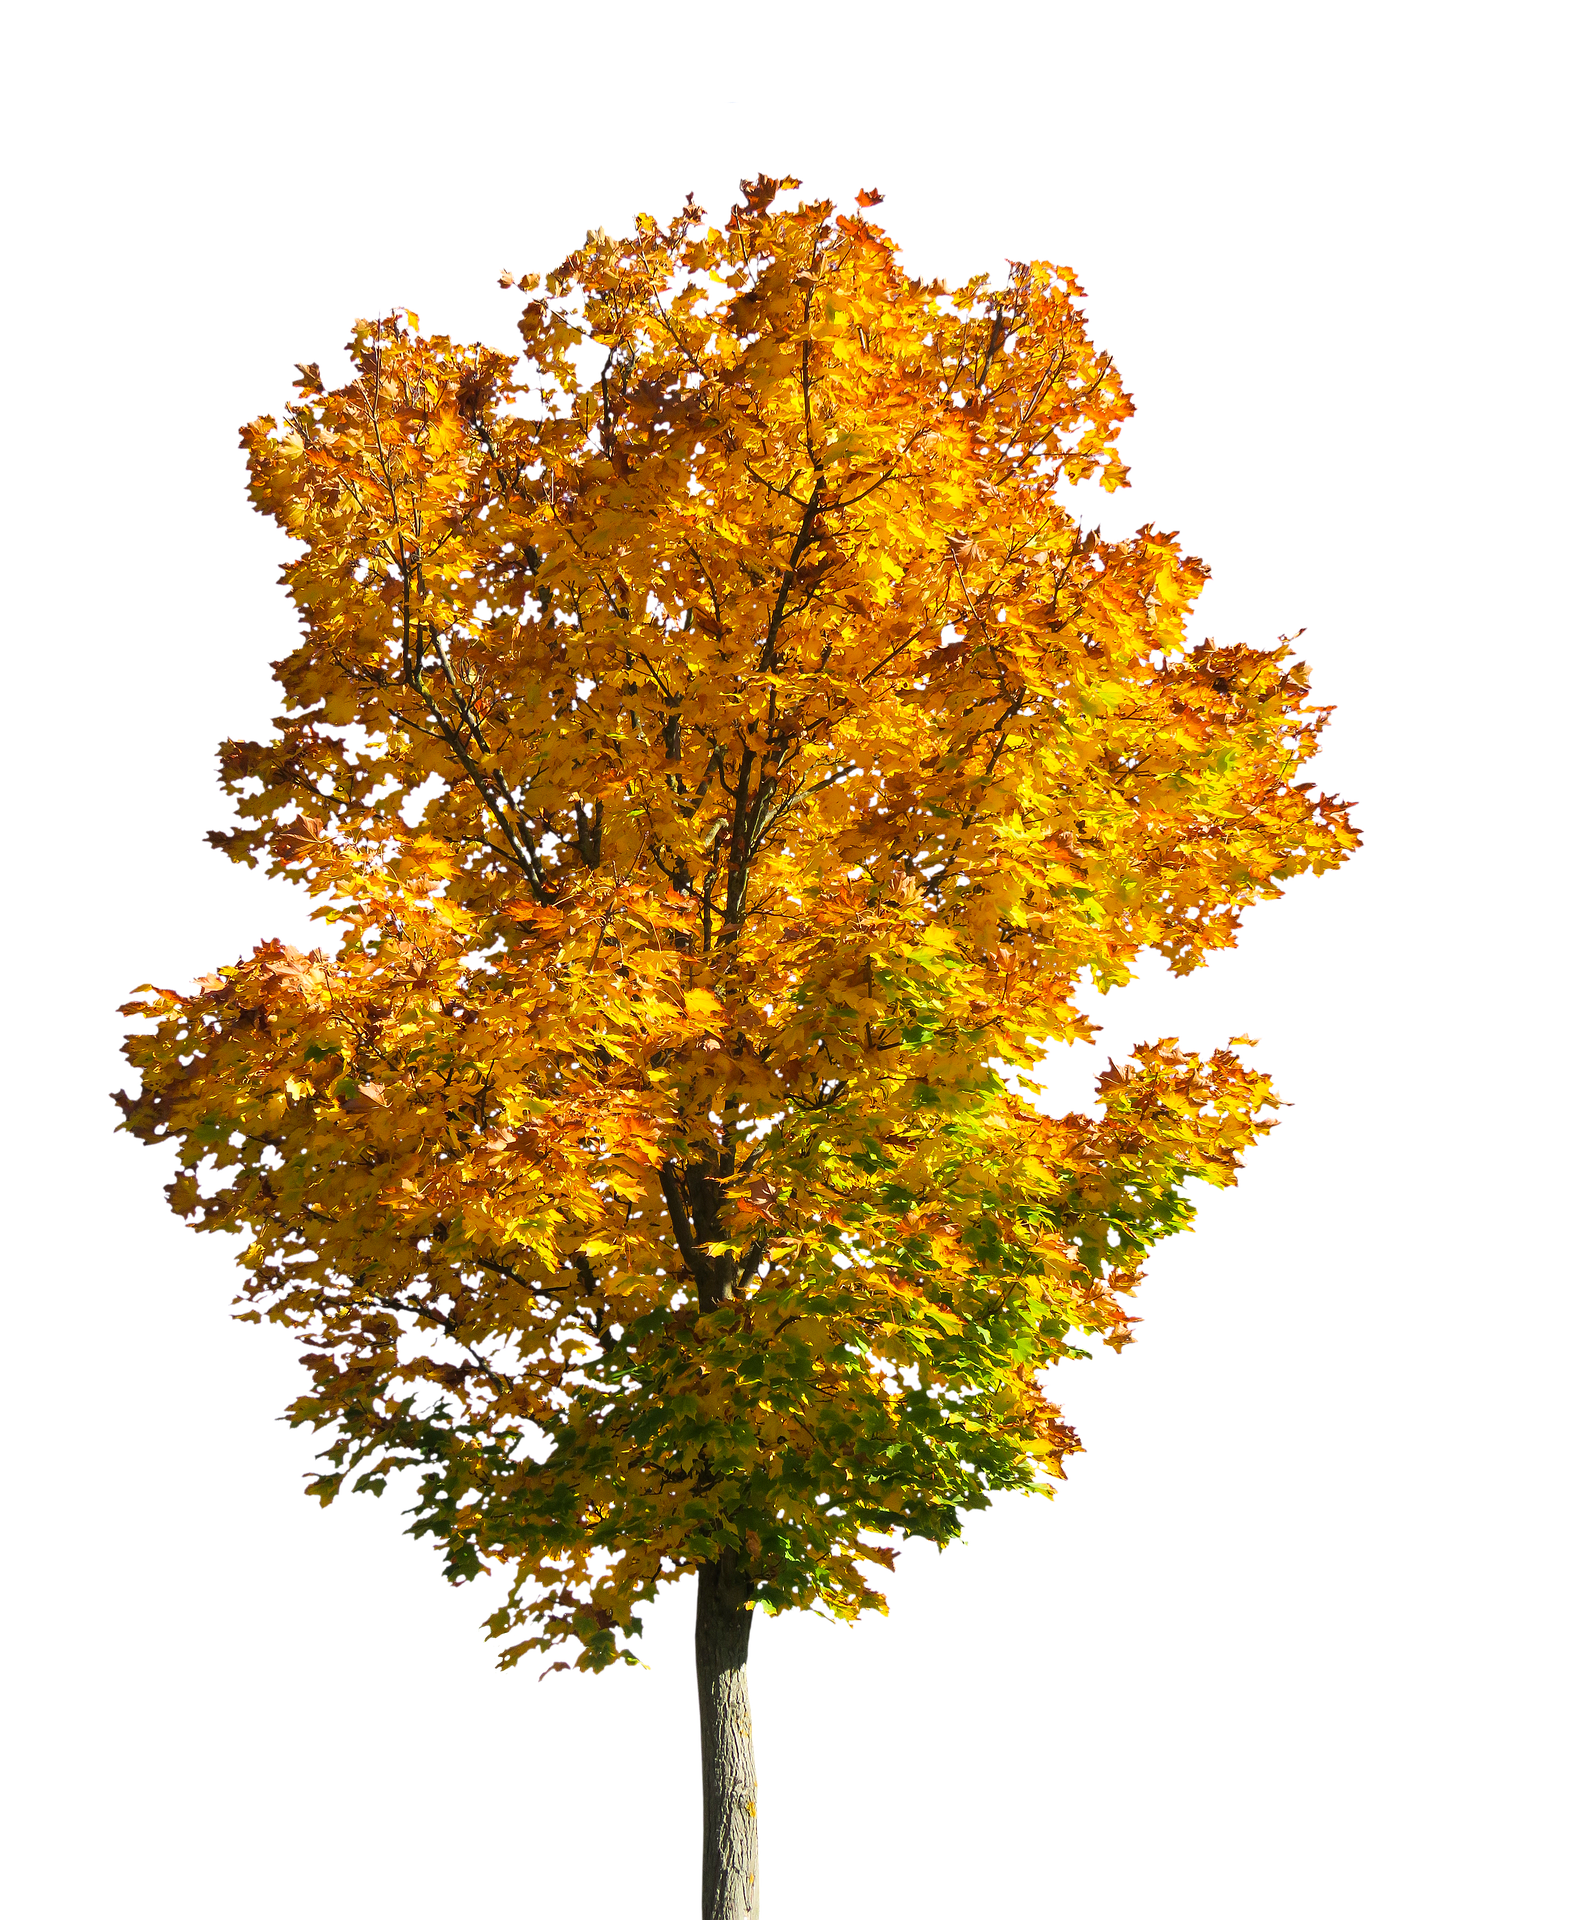 A tree with yellow leaves fading into green at the bottom.